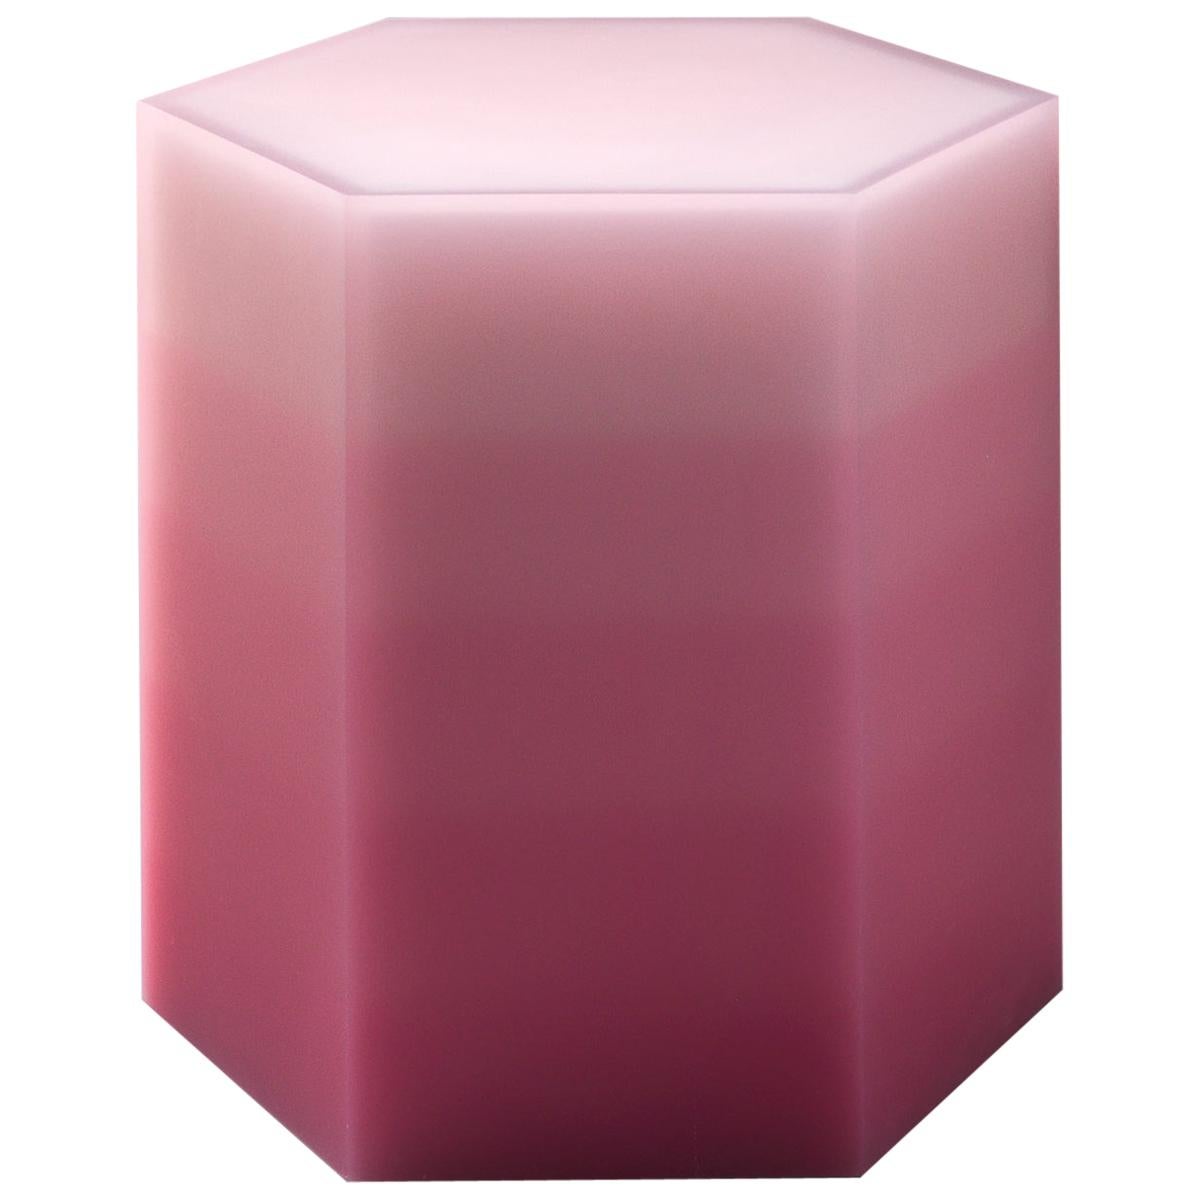 Gradient Hex Box Resin Side Table/Stool Pink by Facture, REP by Tuleste Factory  For Sale